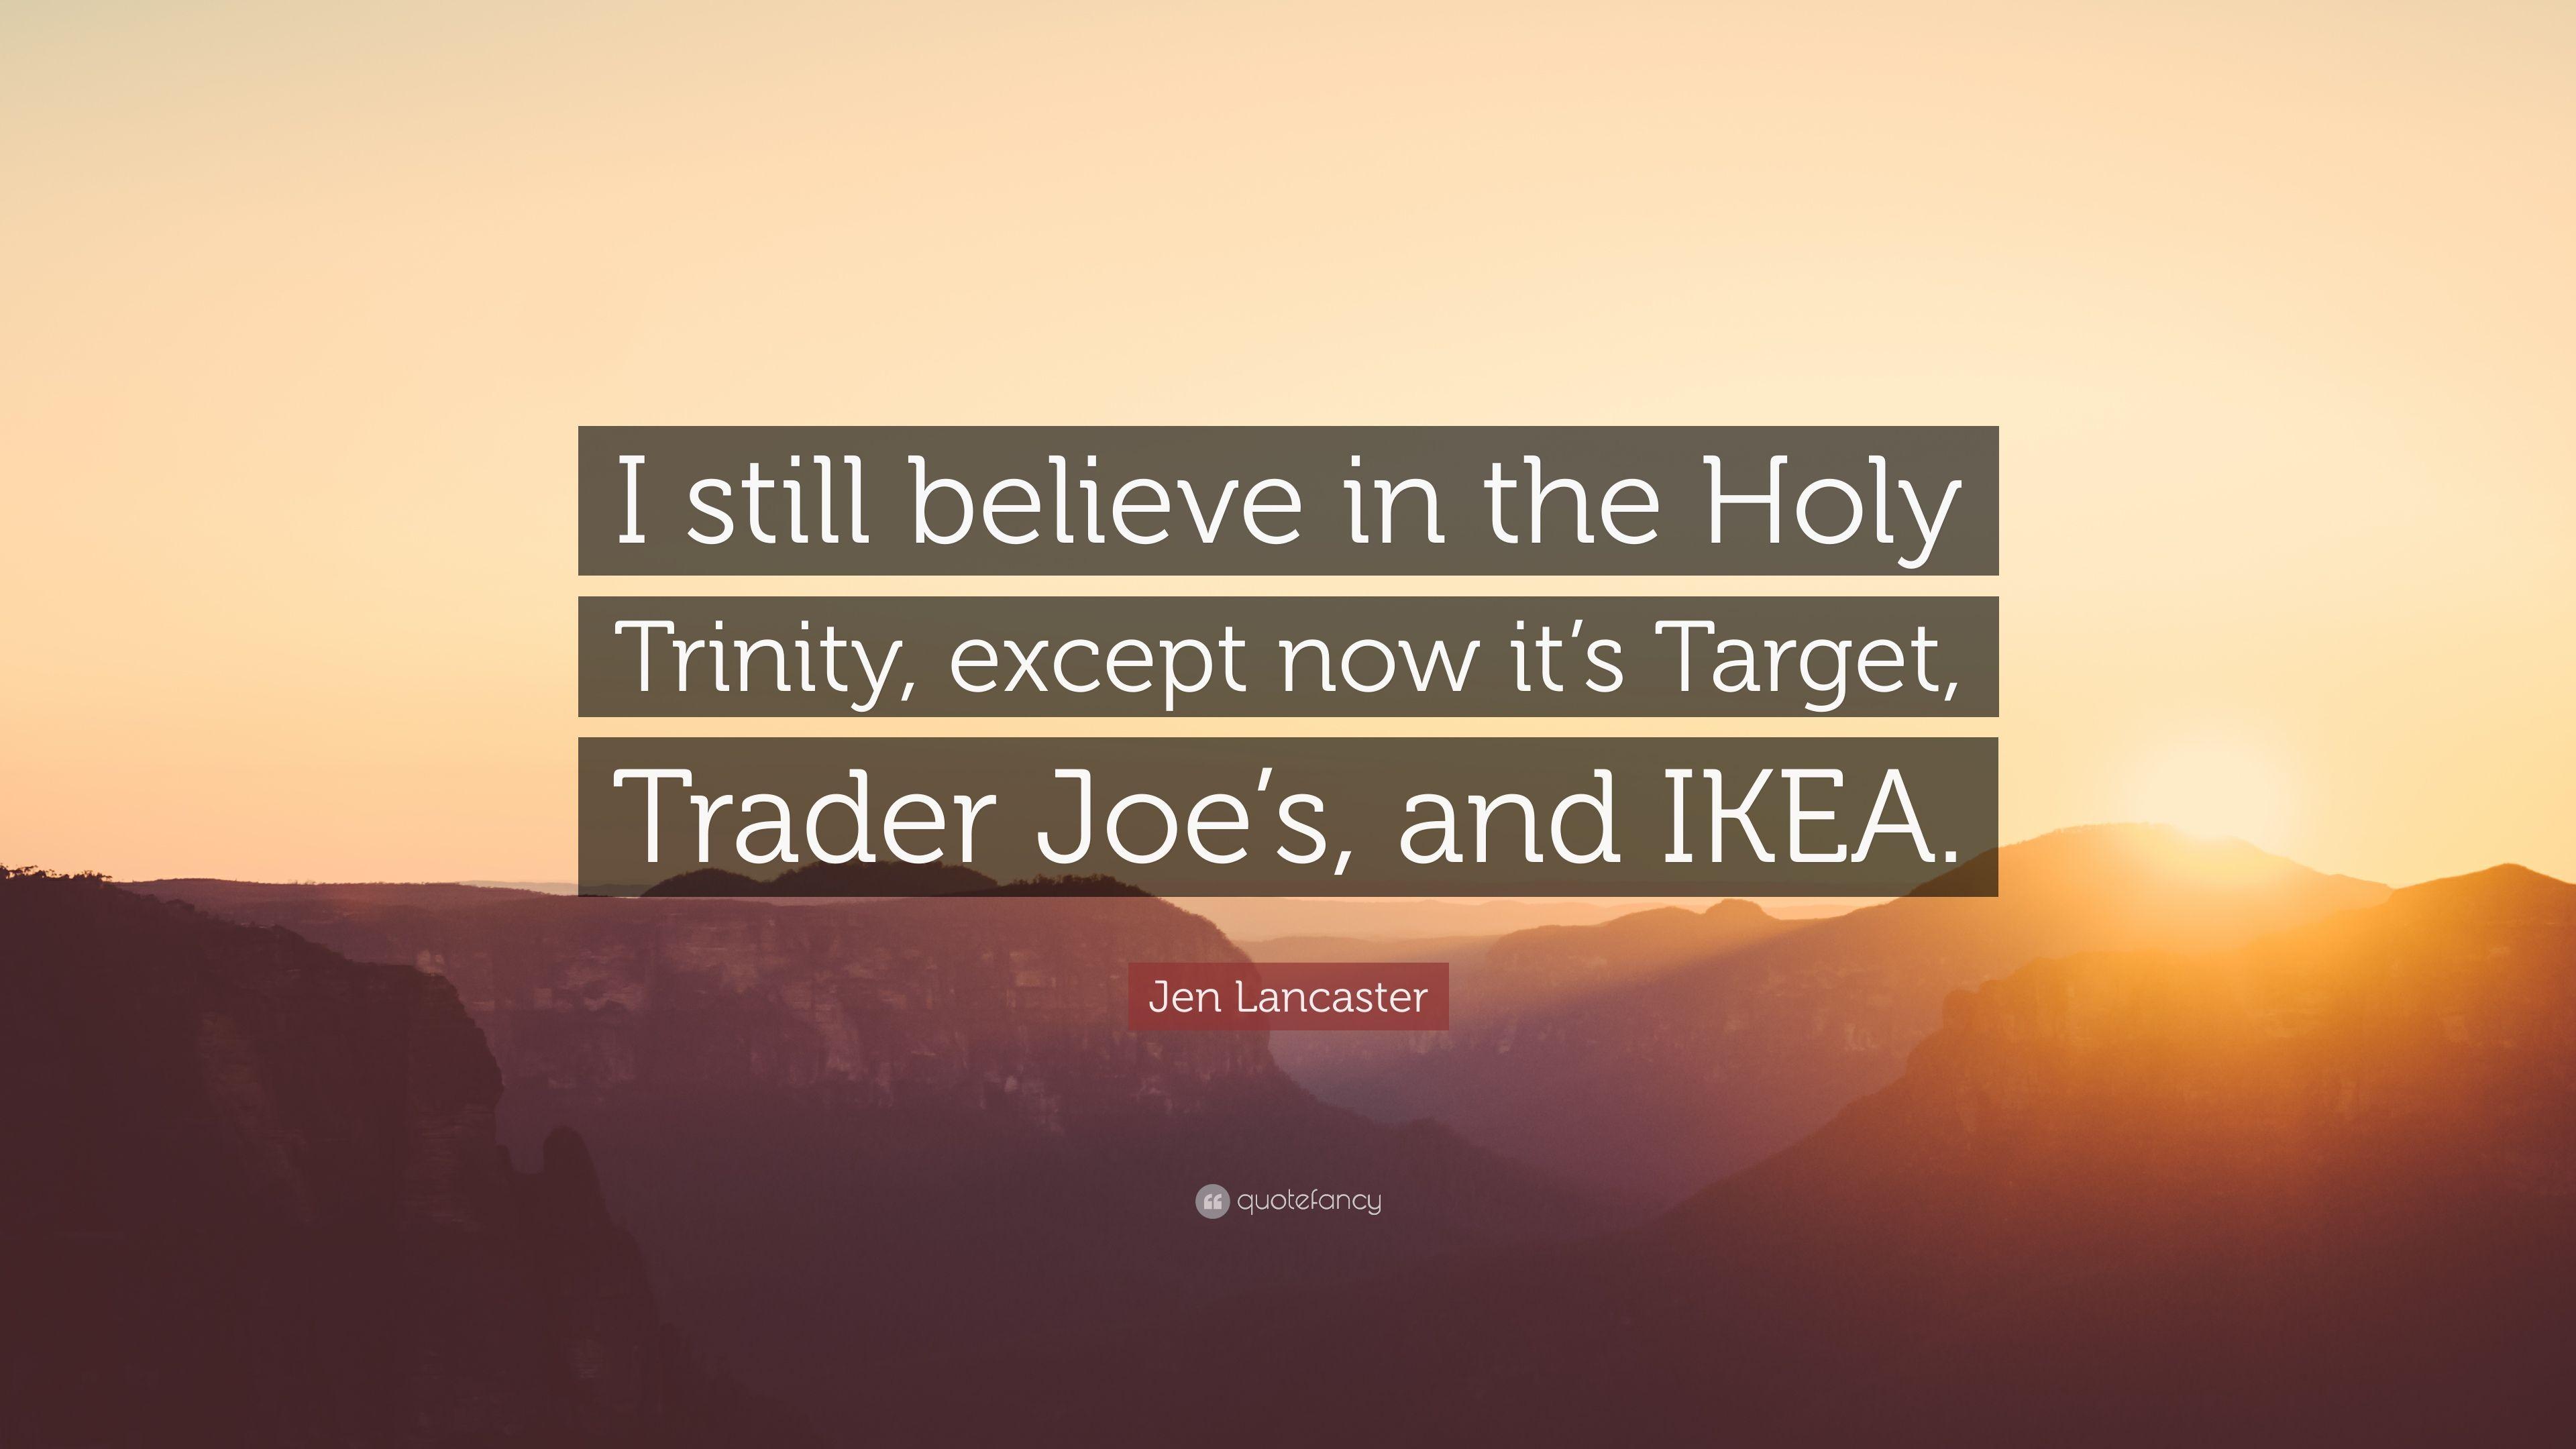 Jen Lancaster Quote: “I still believe in the Holy Trinity, except